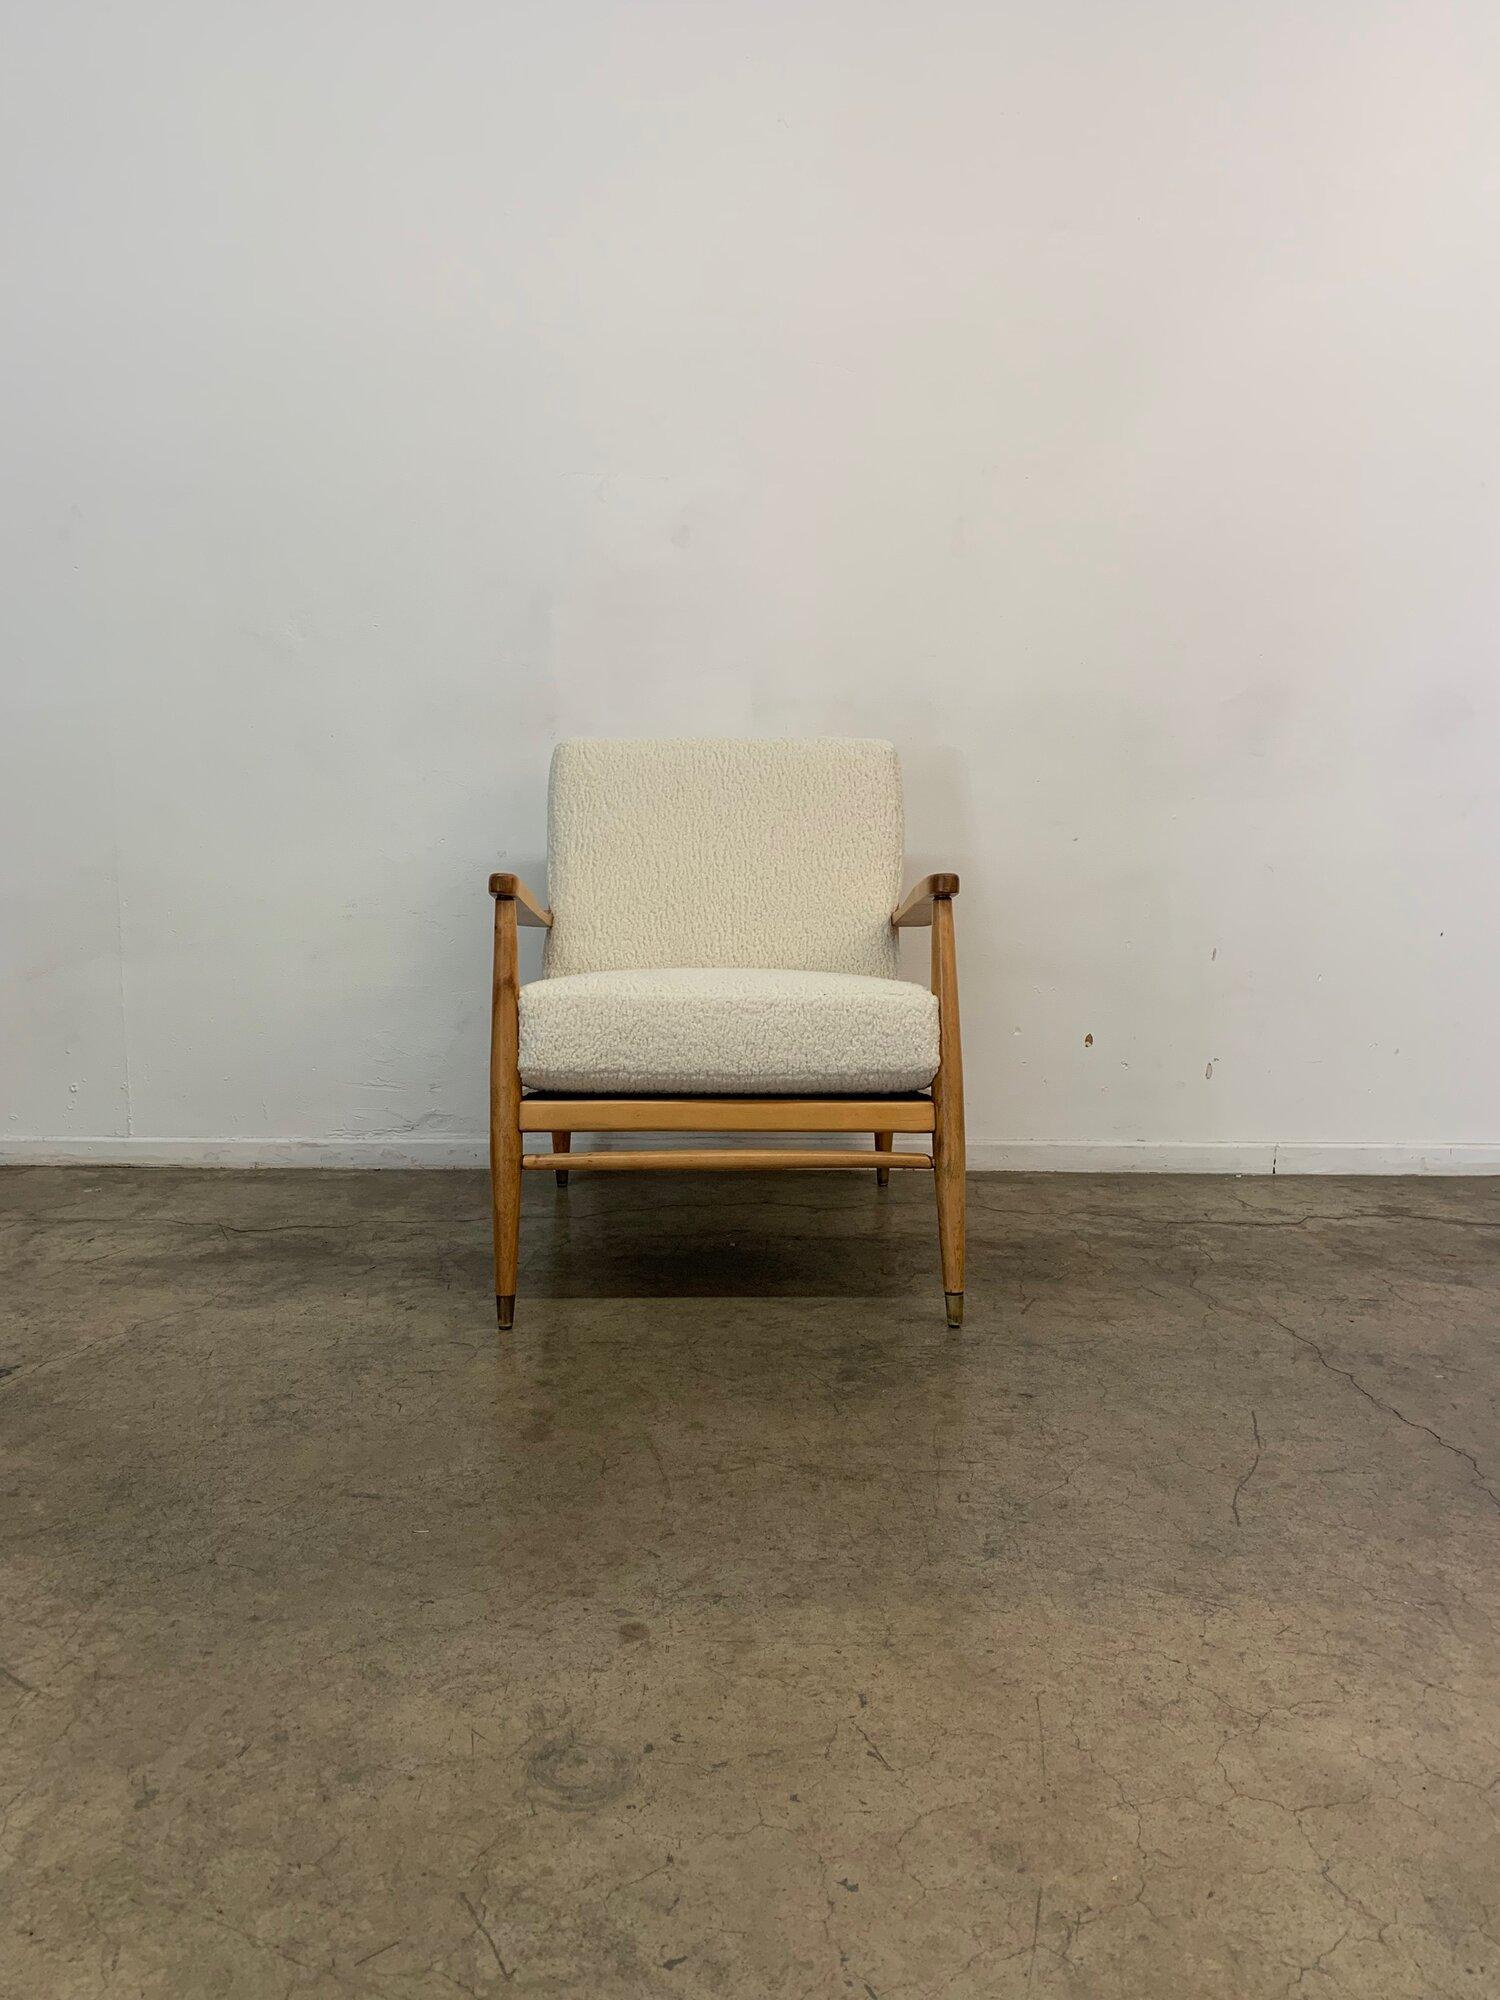 W27 // D27 // H30

SW22 // SD18 // SH18 // AH6

1950’s vintage lounge chair fully restored in a white Sherpa fabric with solid alder wood frame. The frame has been fully restored and the brass caps have been polished. 